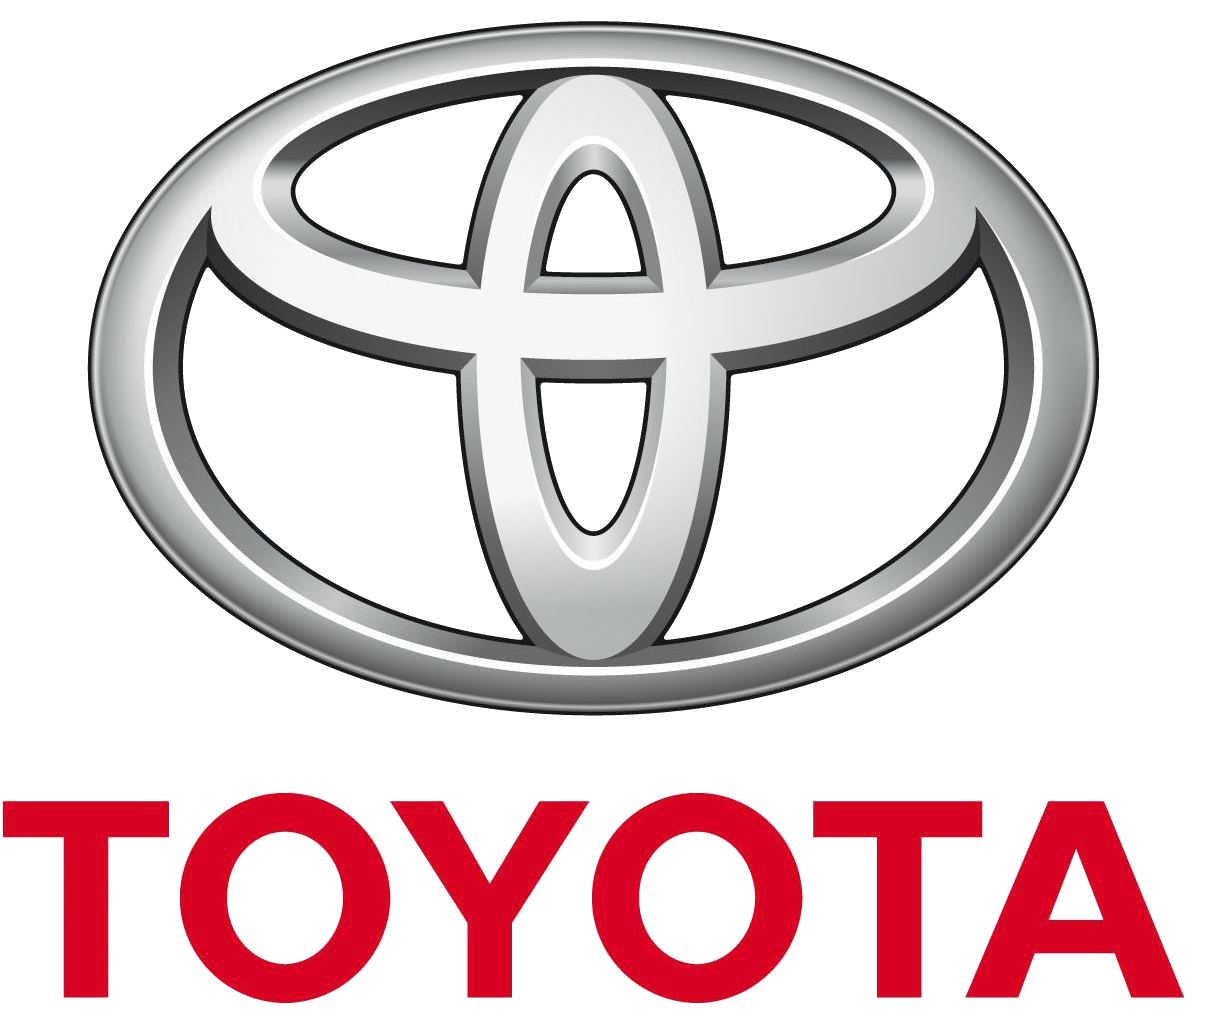 Amazing Toyota Pictures & Backgrounds